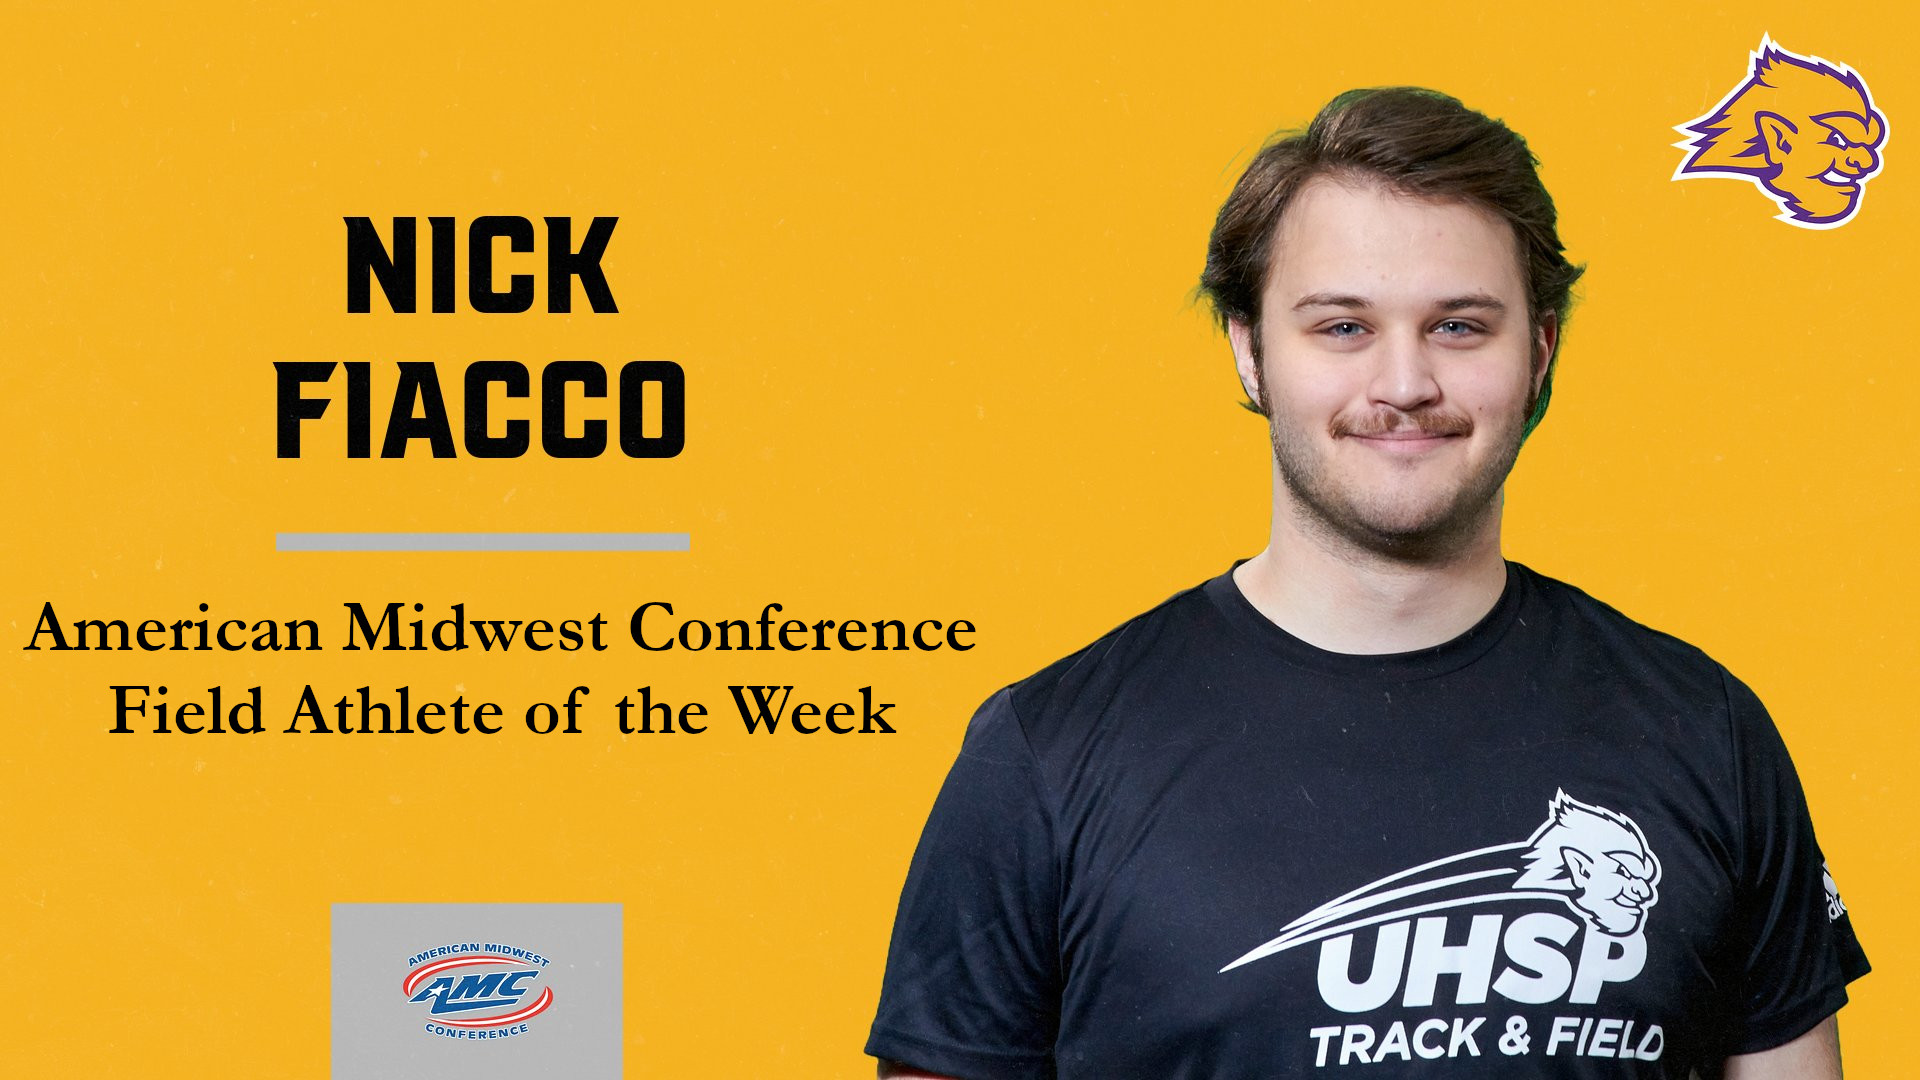 Fiacco is AMC's Field Athlete of the Week